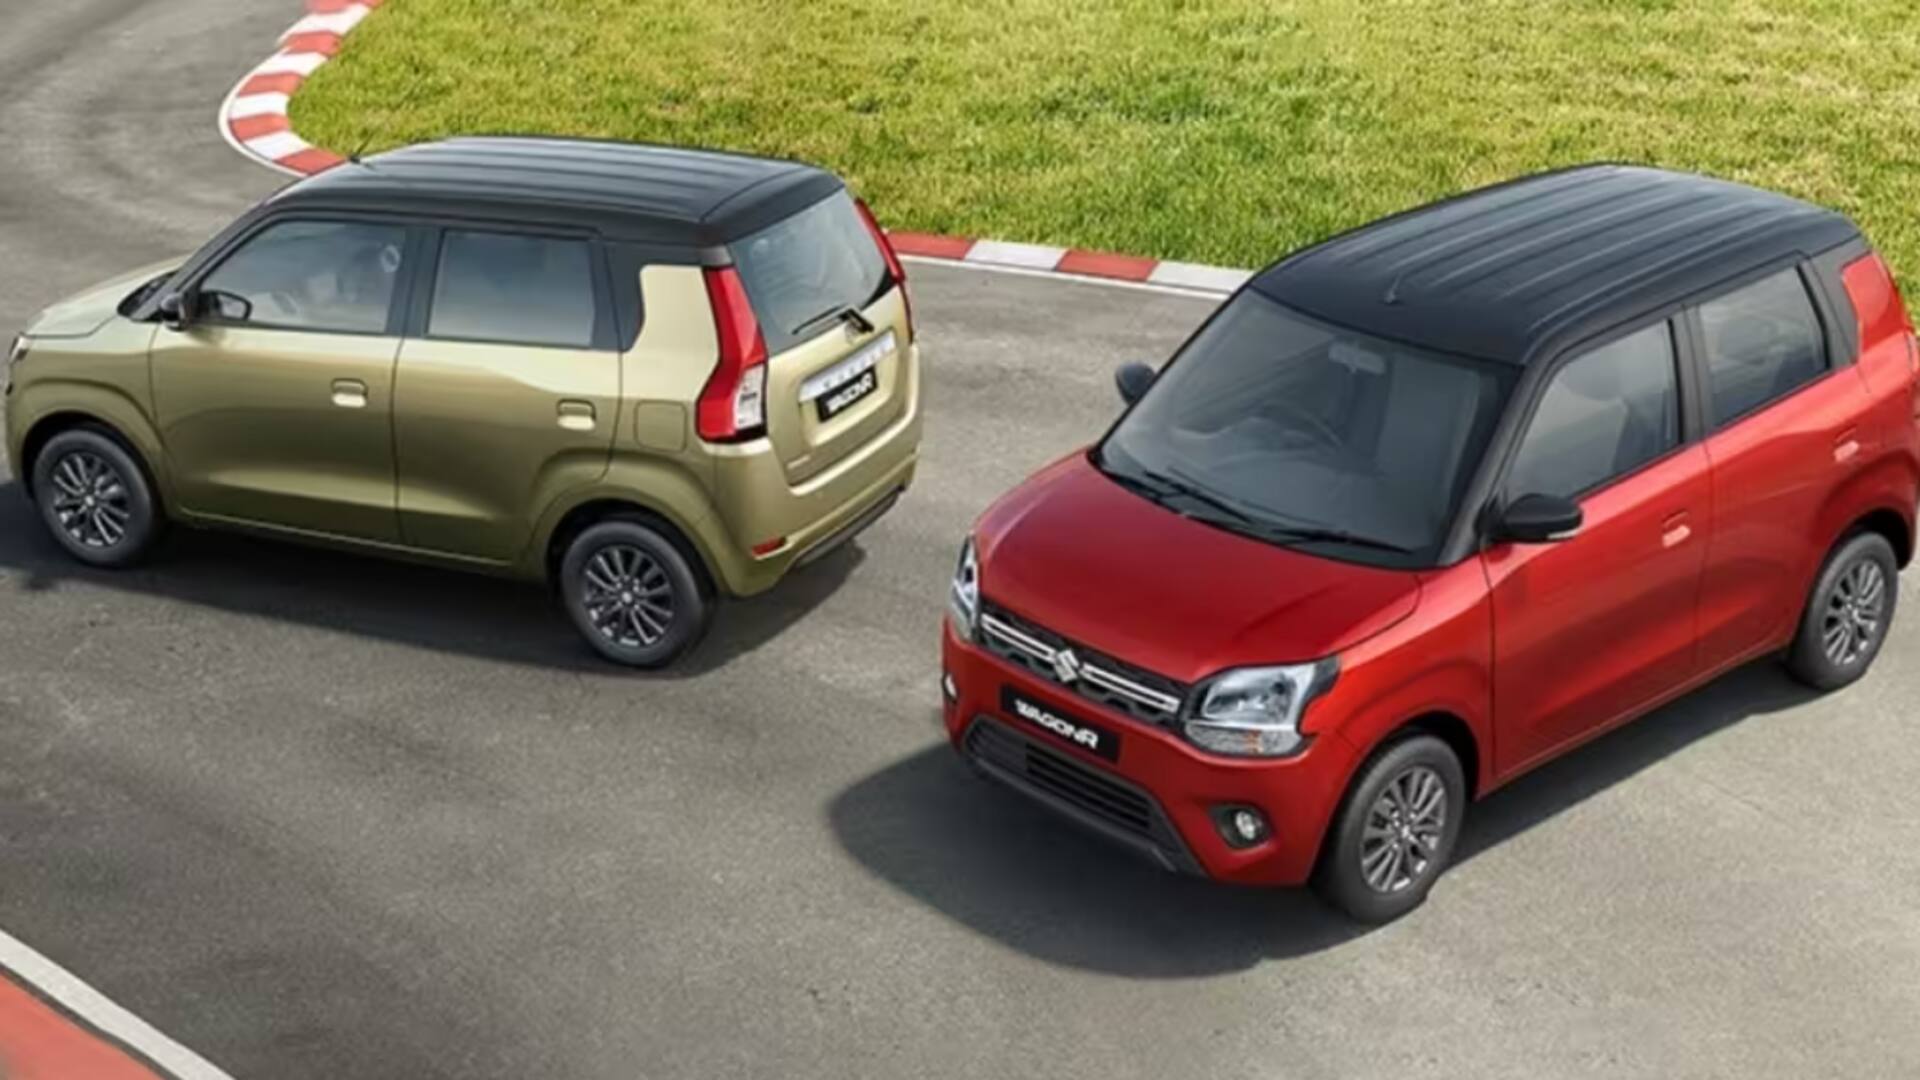 Top 10 bestselling cars in India this October: Check list